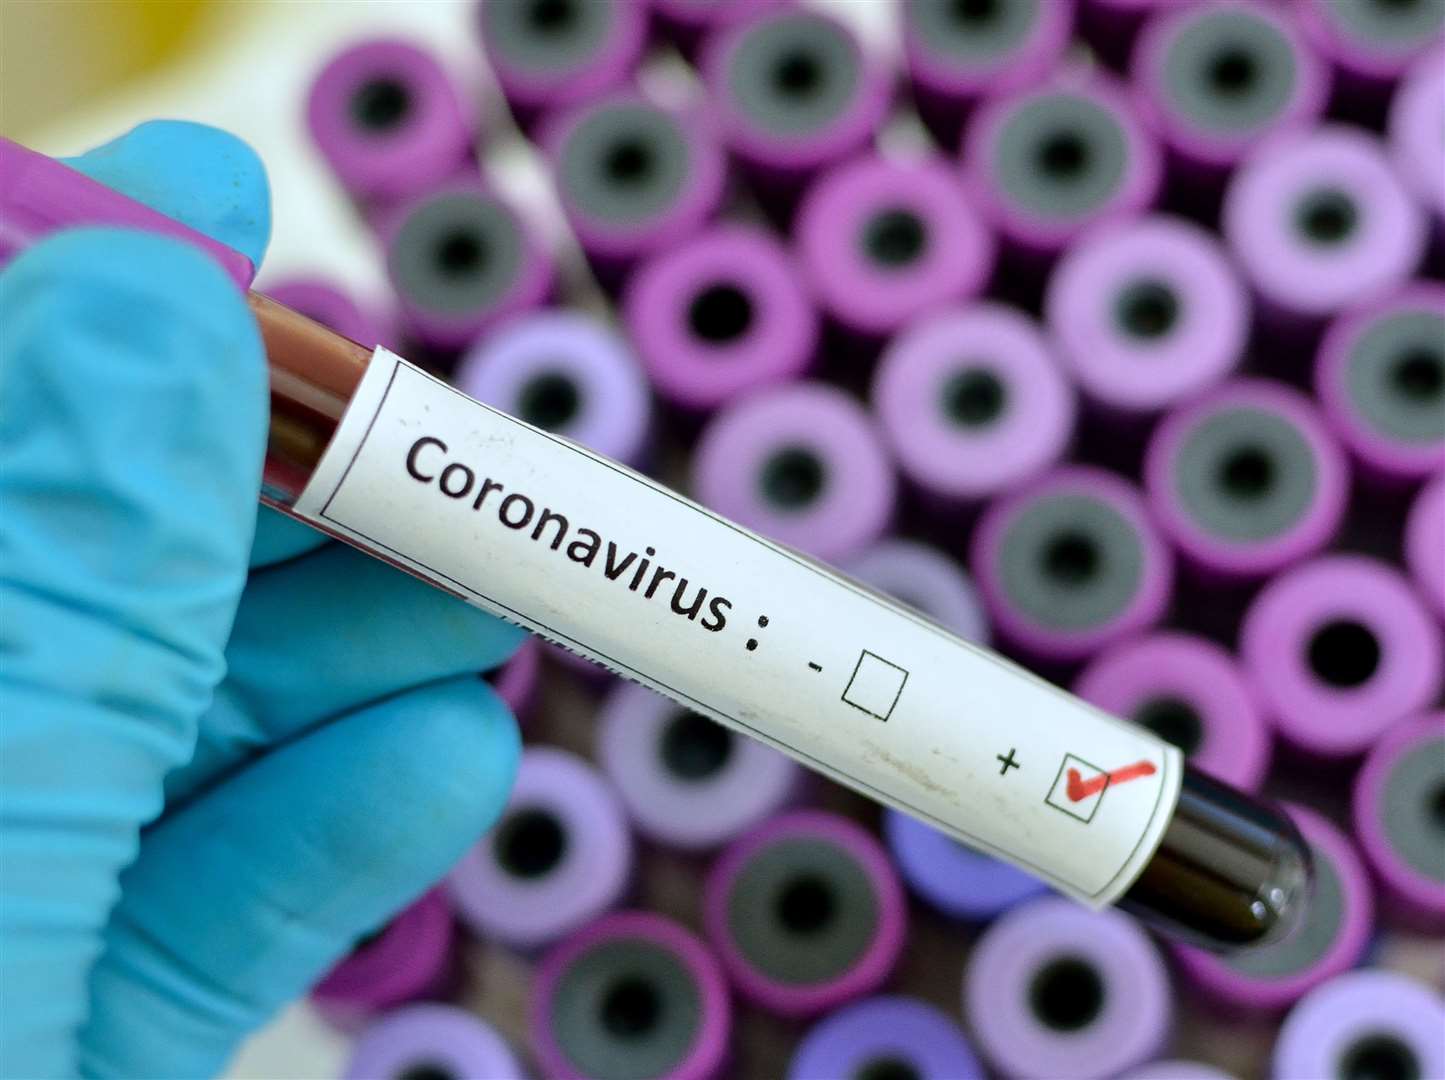 As of yesterday, seven people in Kent have tested positive for coronavirus